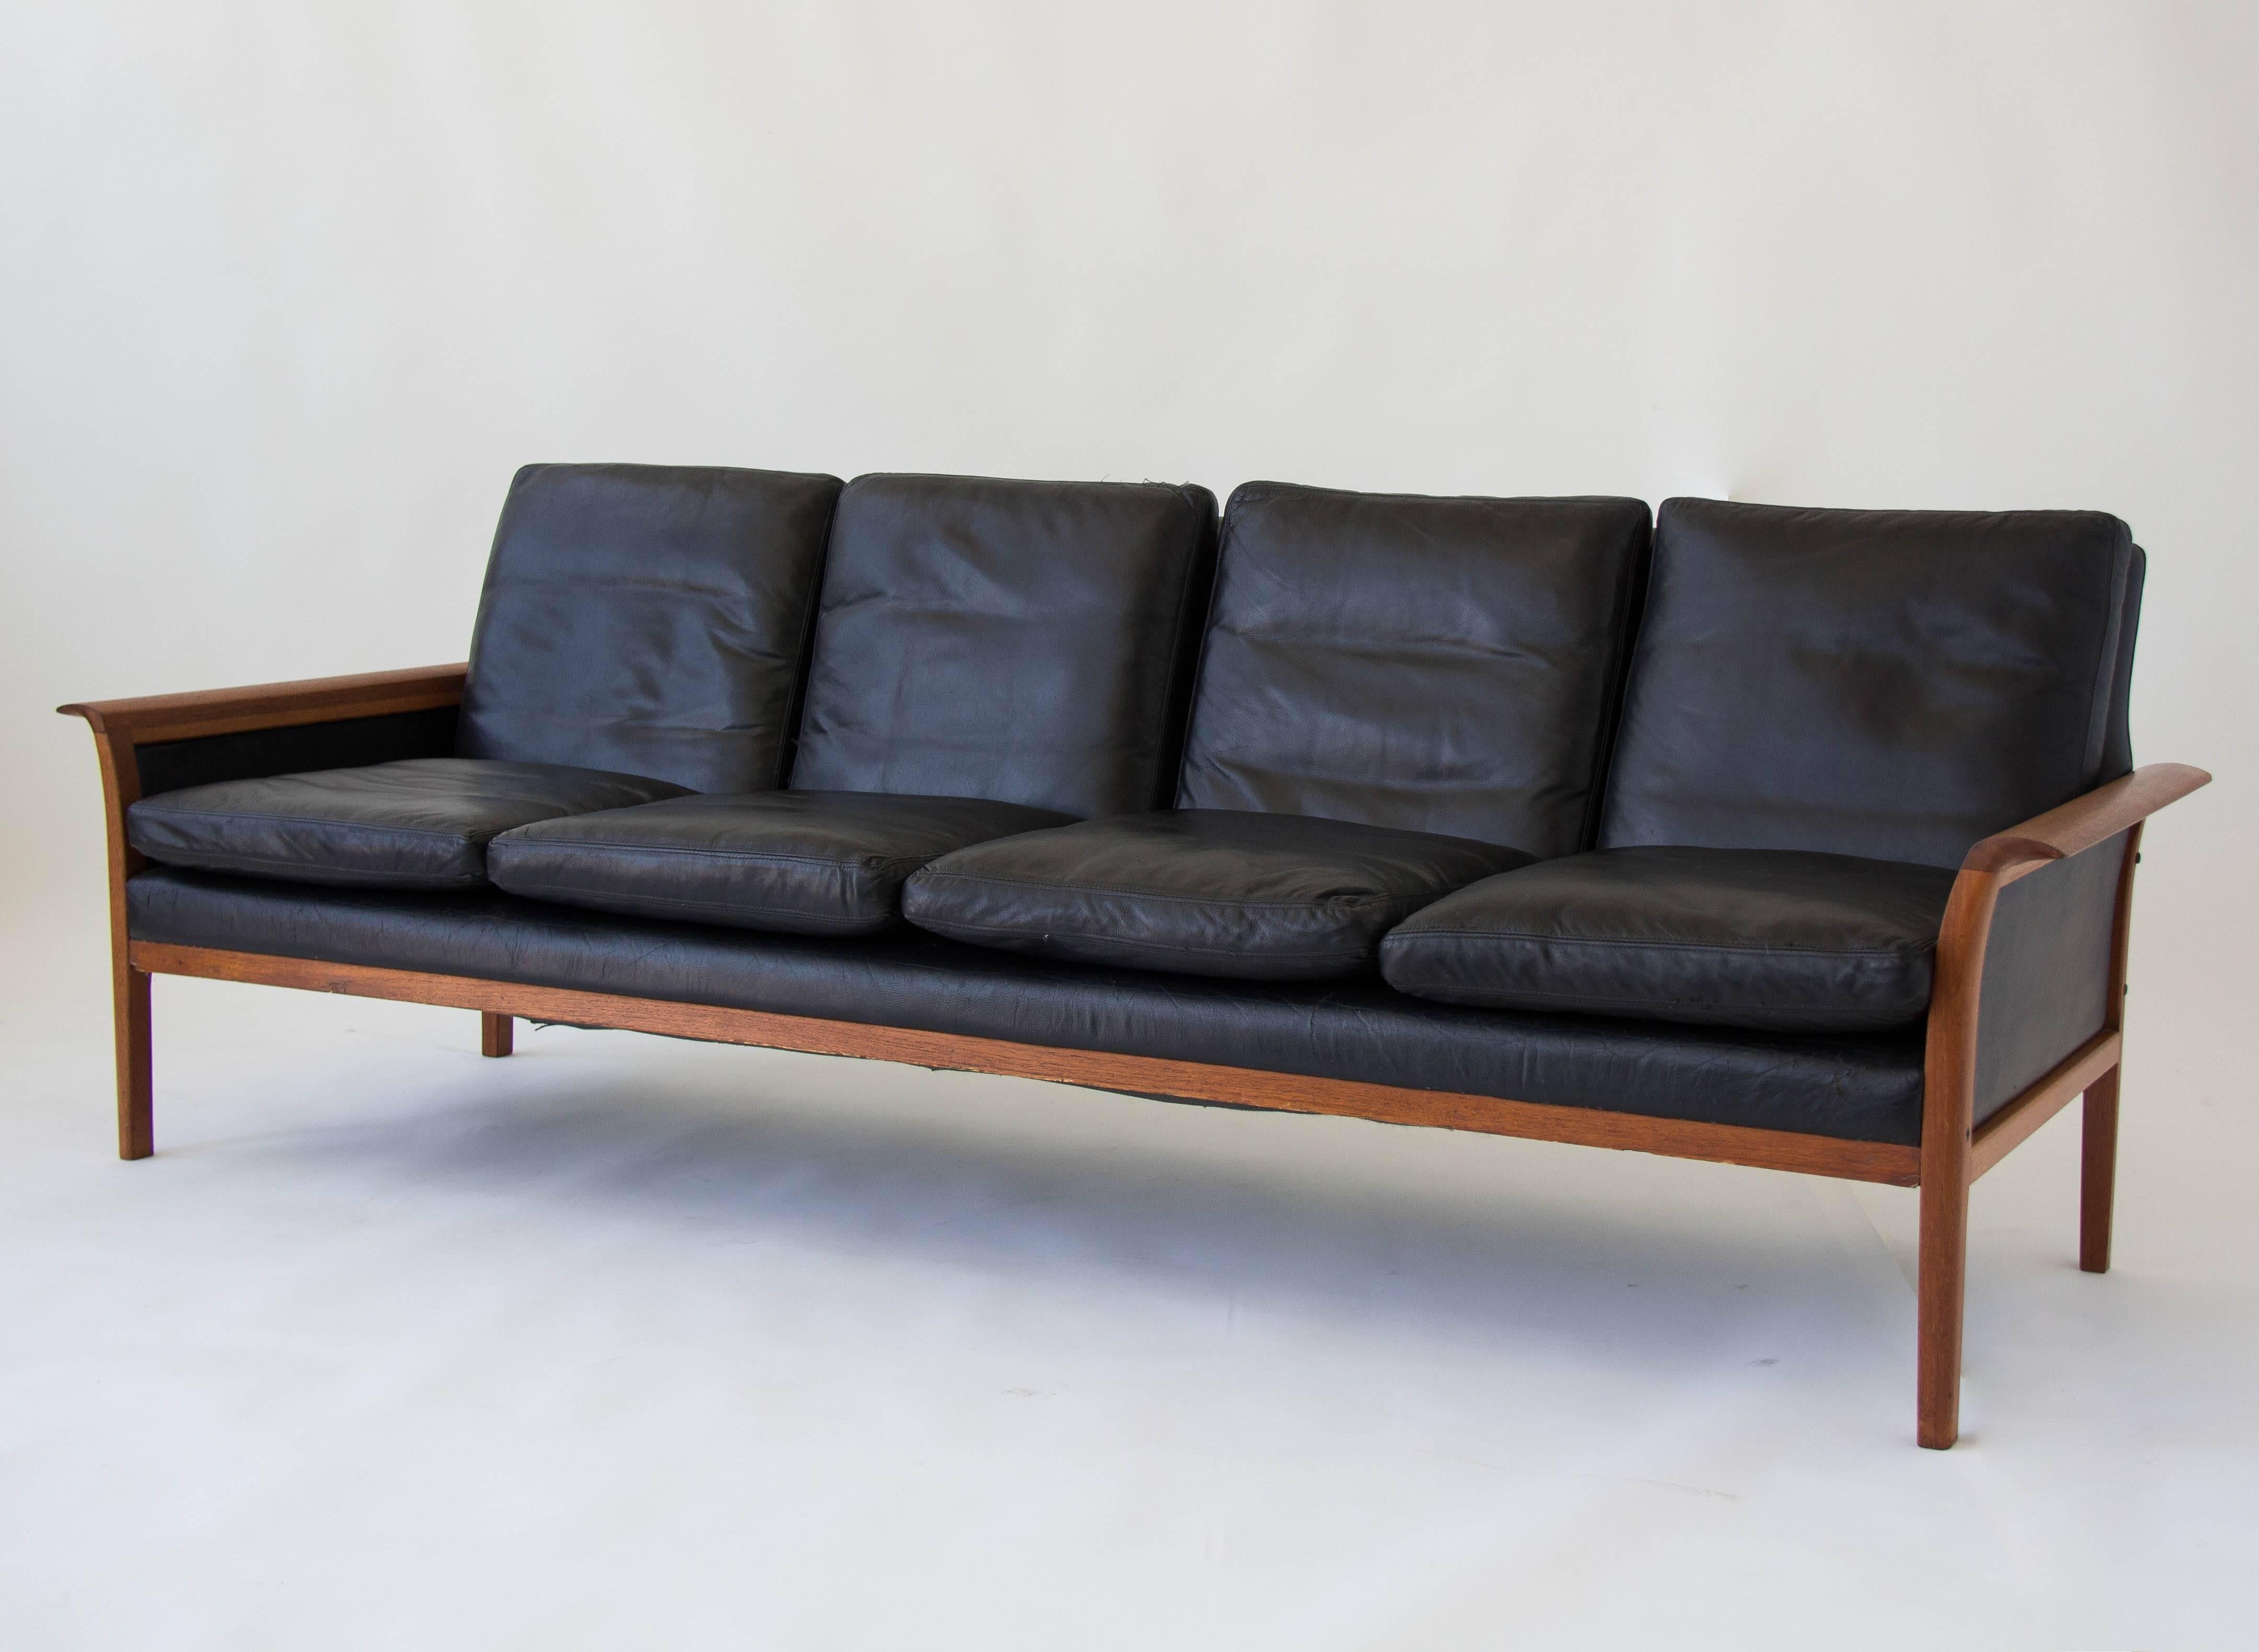 Norwegian four-seat sofa with teak frame, upholstered in original black leather, designed by Knut Sæter and manufactured by his own company, Vatne Lenestolfabrikk. The teak frame has curved armrests and back and side panels are also covered in black